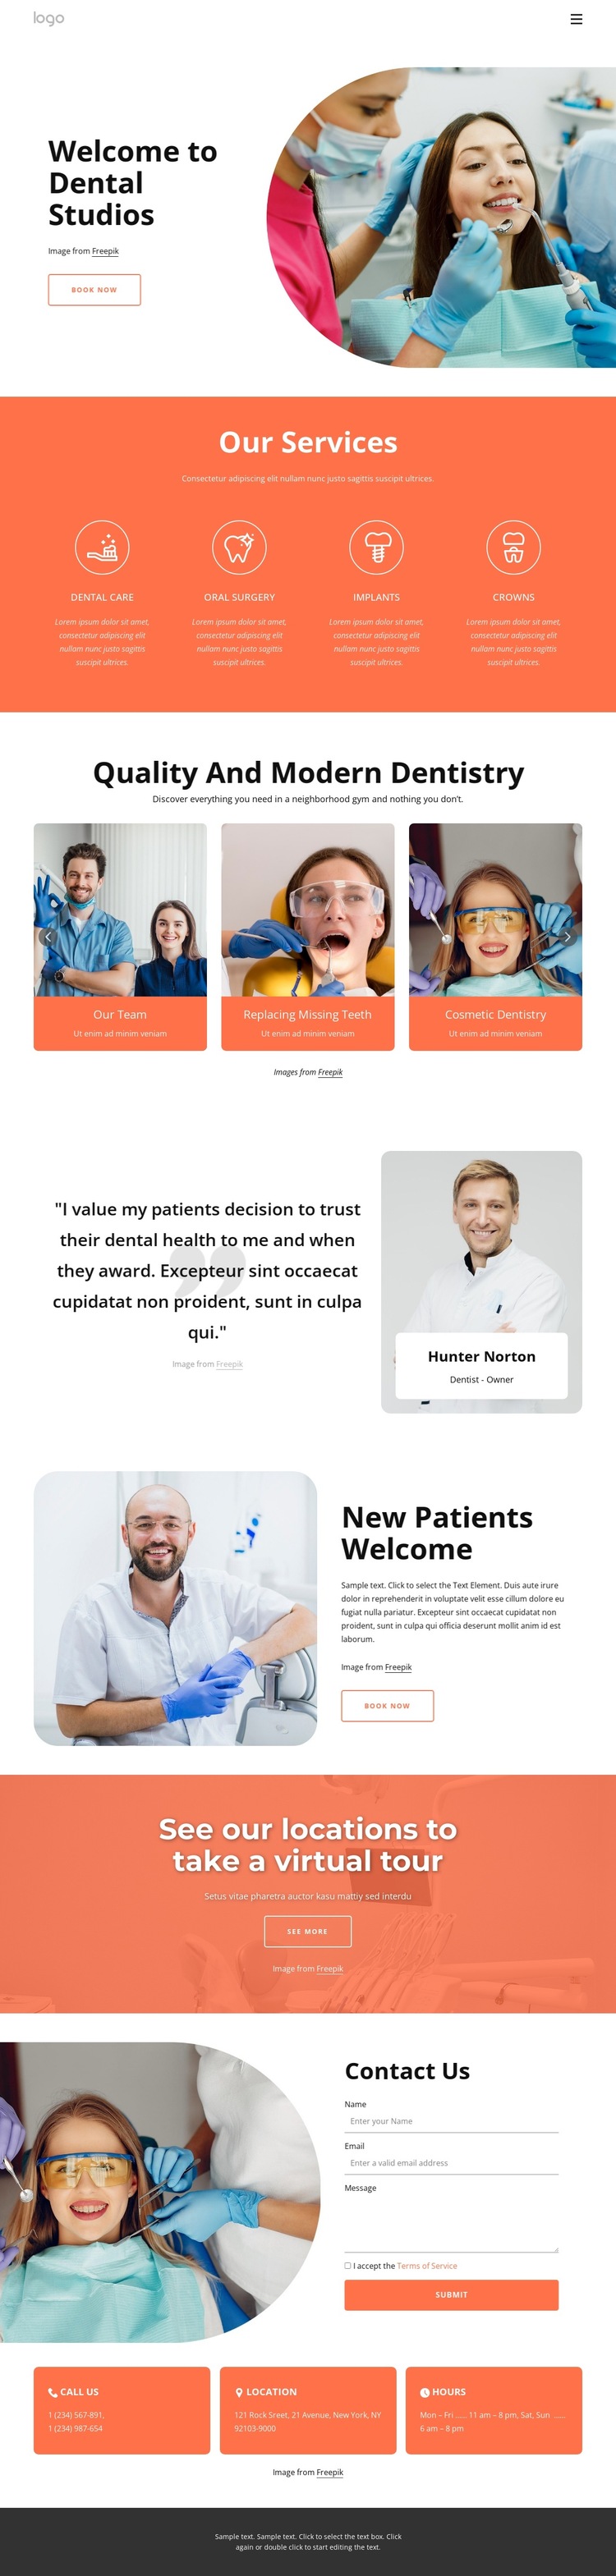 Welcome to dental studios HTML5 Template